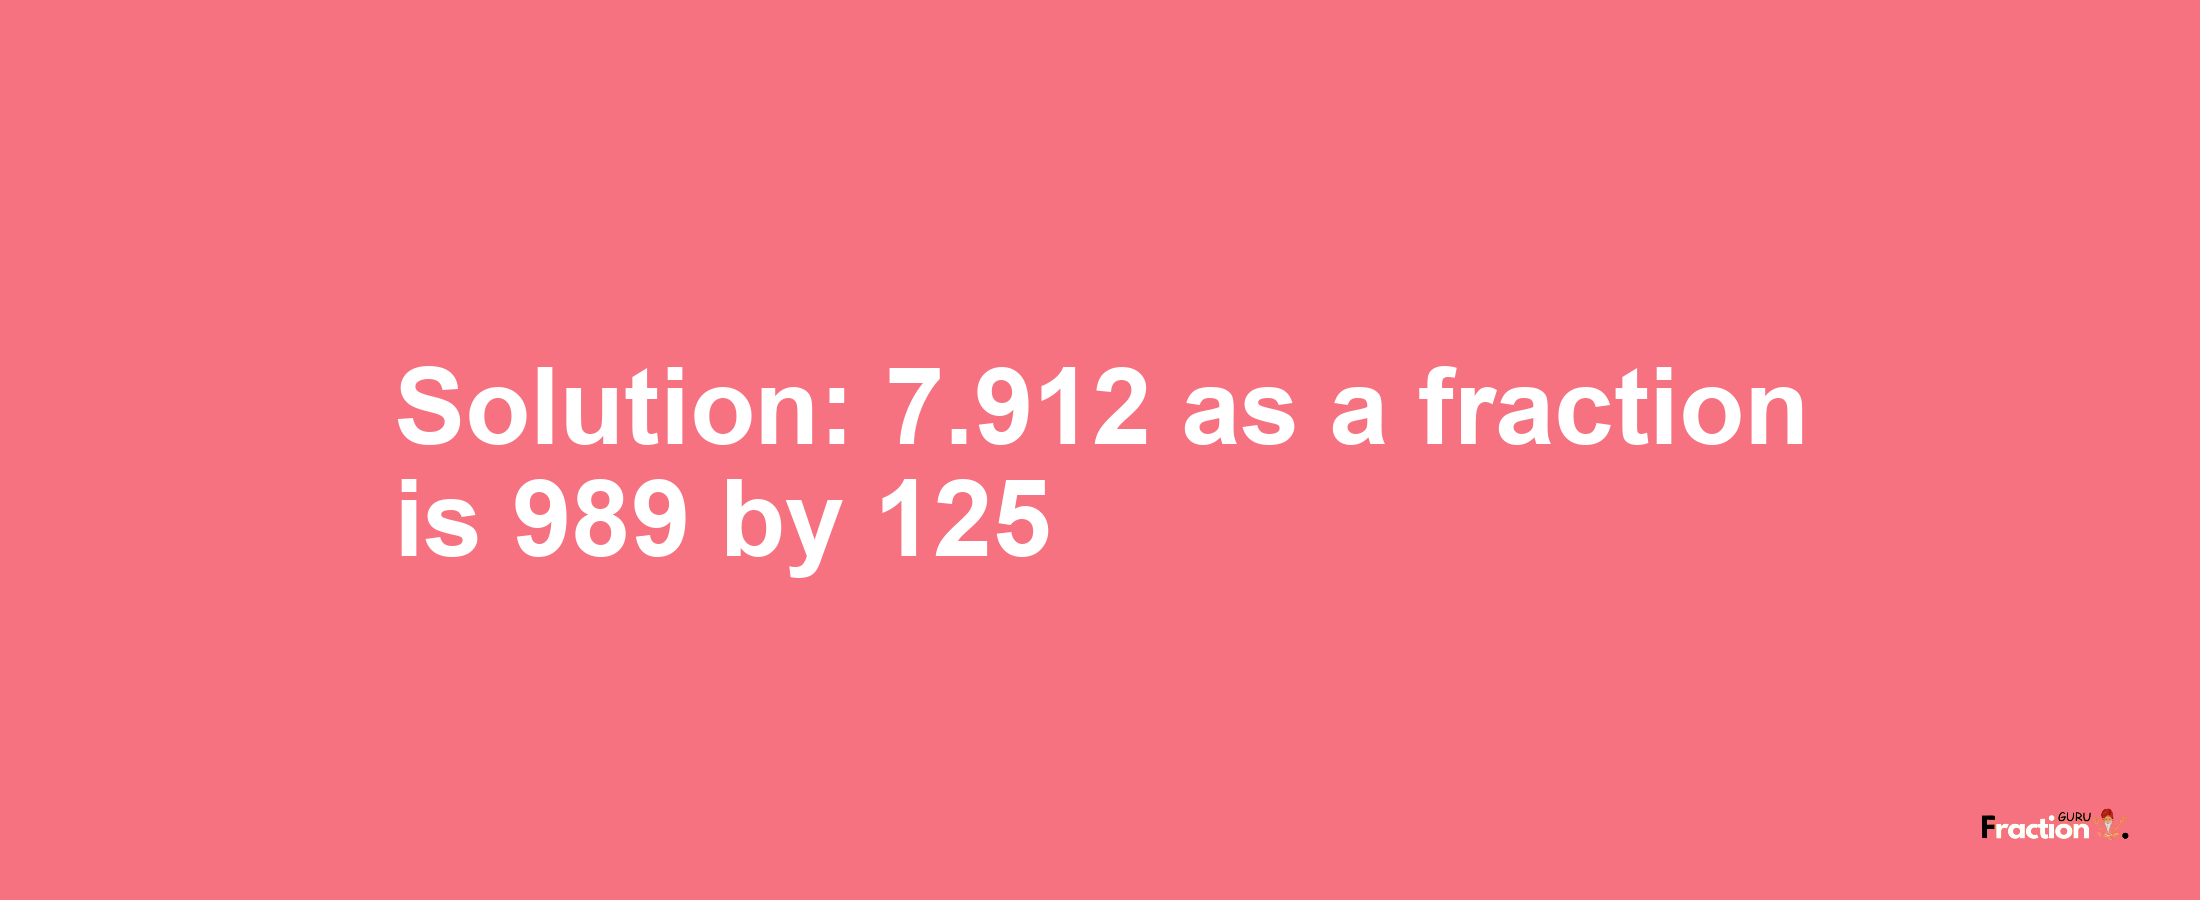 Solution:7.912 as a fraction is 989/125